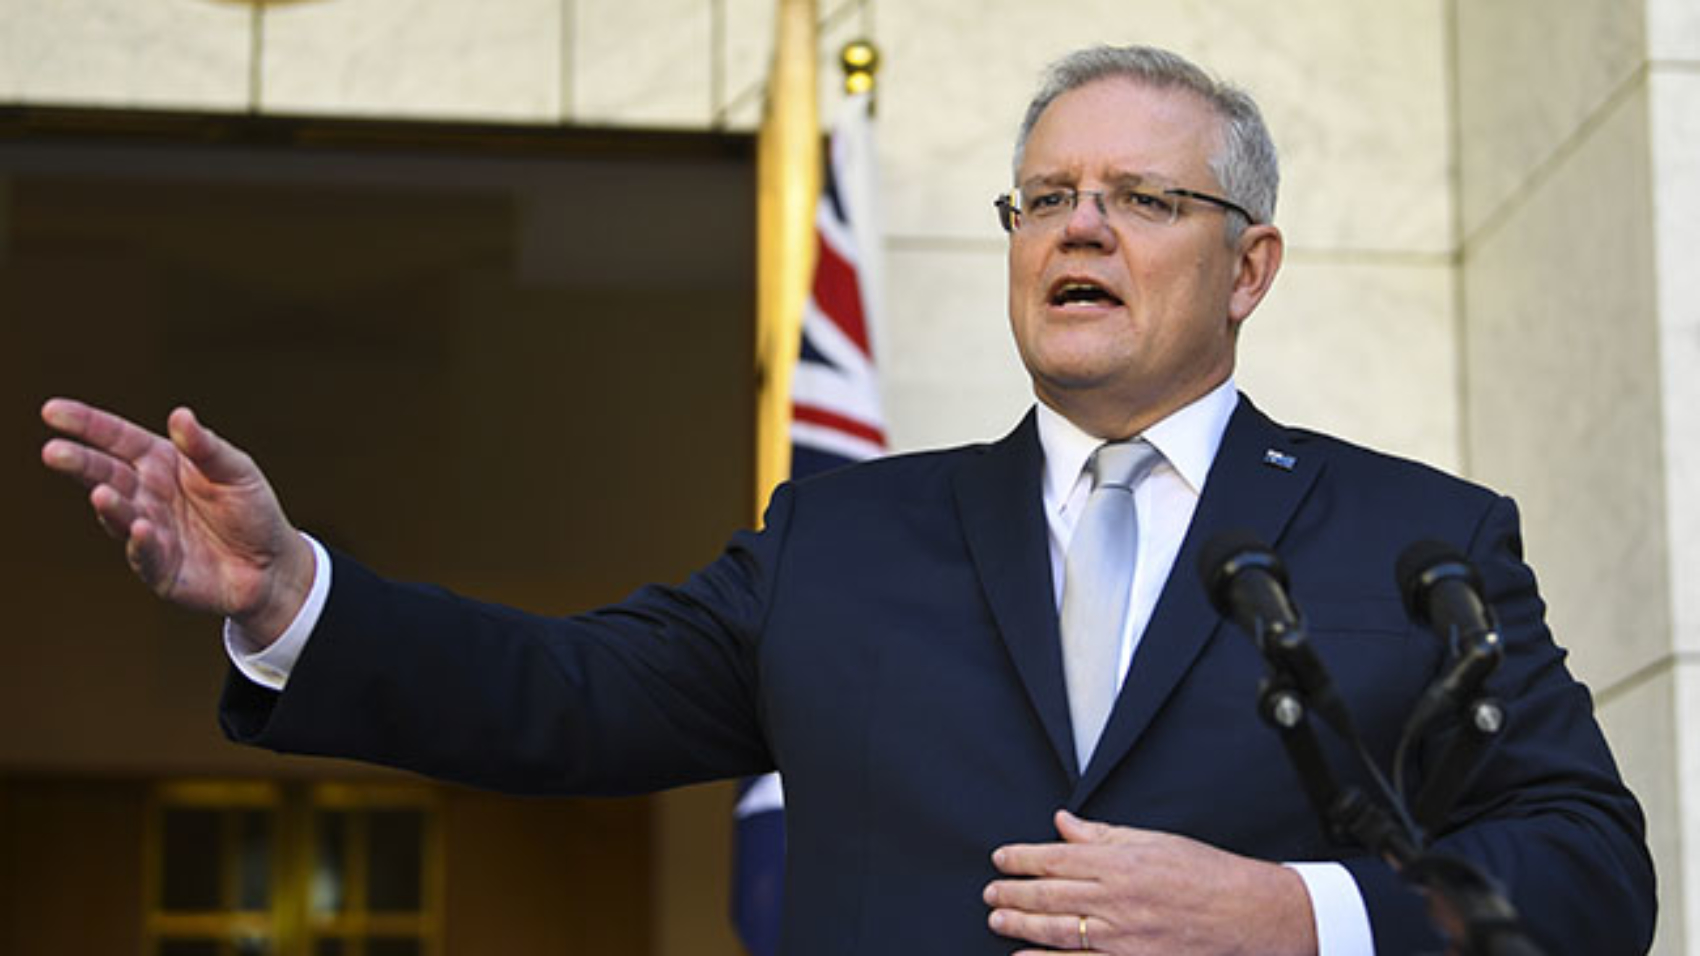 Australian Prime Minister Scott Morrison speaks to the media during a press conference at Parliament House in Canberra, Wednesday, March 18, 2020. (AAP Image/Lukas Coch) NO ARCHIVING